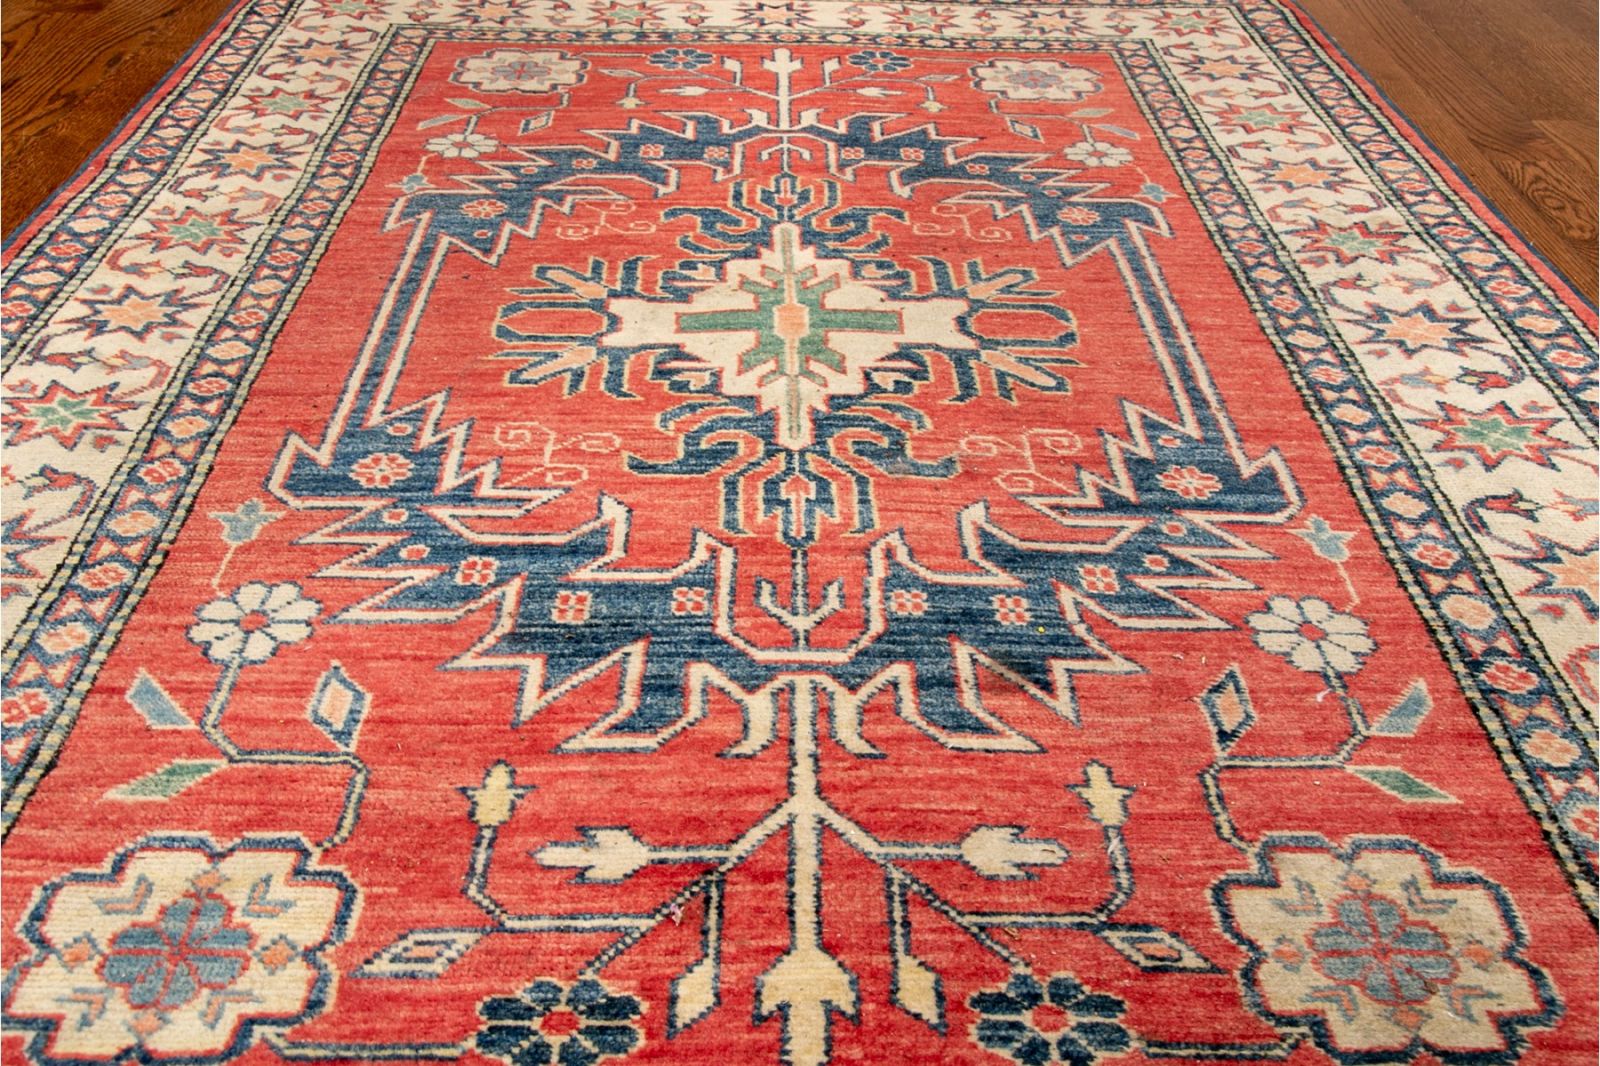 Handwoven Wool Persian area rug carpet with a lovely central medallion on a red colored ground with scroll and foliate decoration with an outer foliate decorated band on lighter colored ground